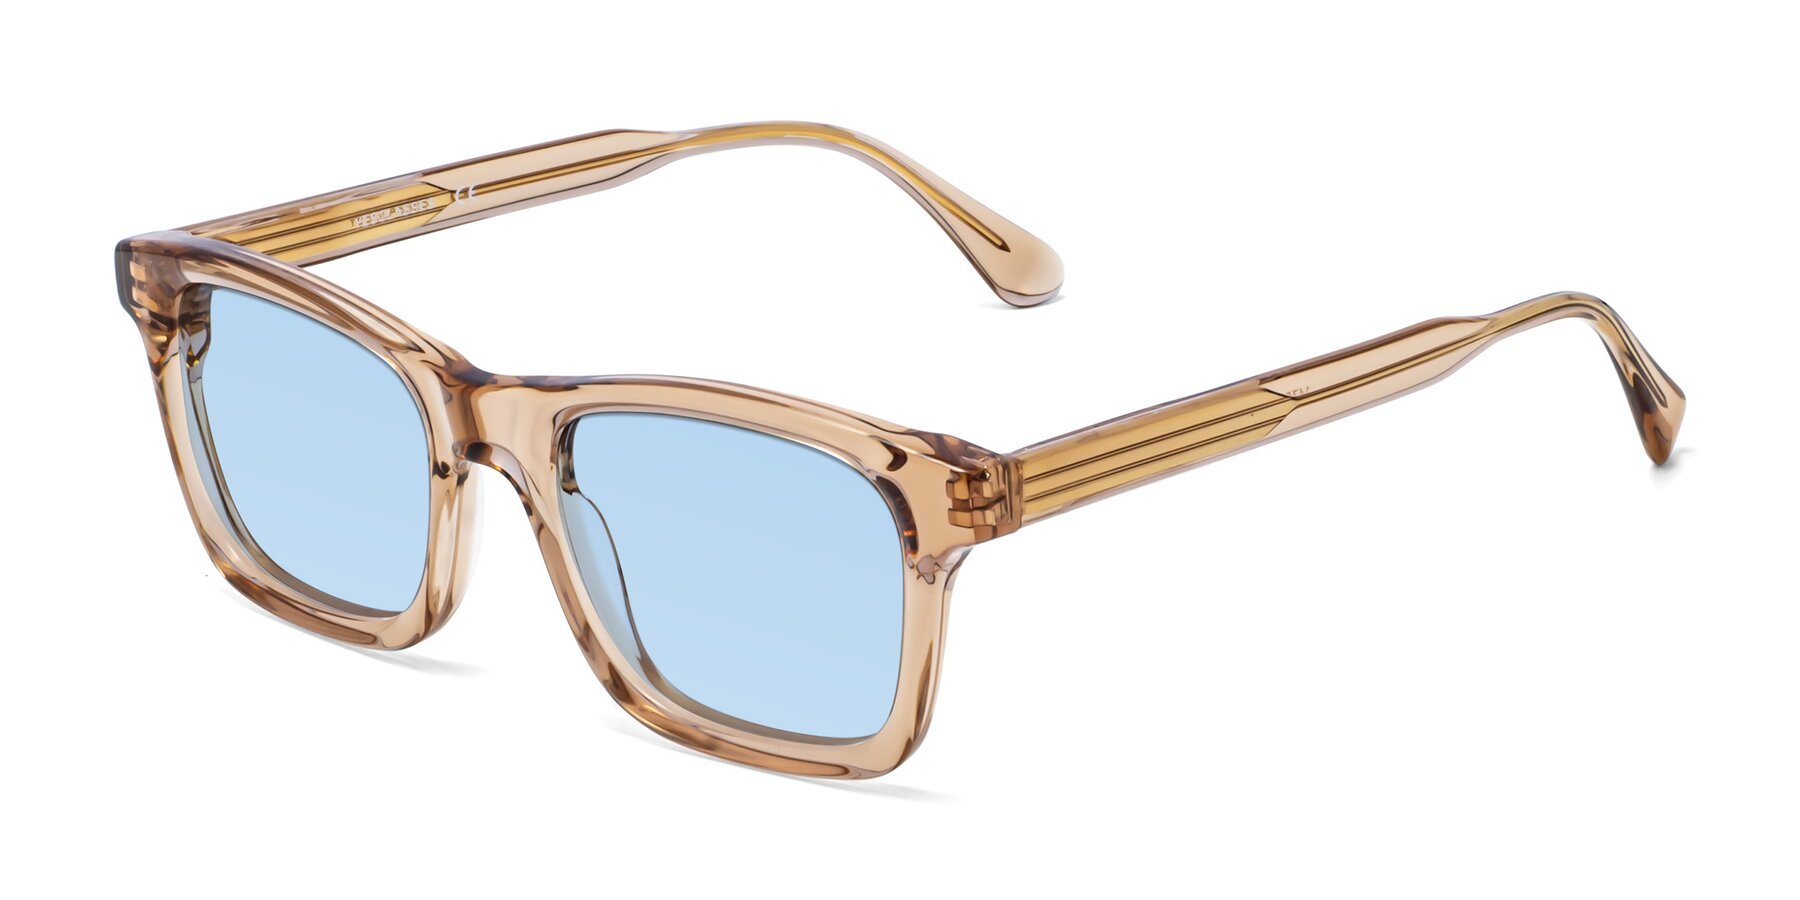 Angle of 1475 in Caramel with Light Blue Tinted Lenses